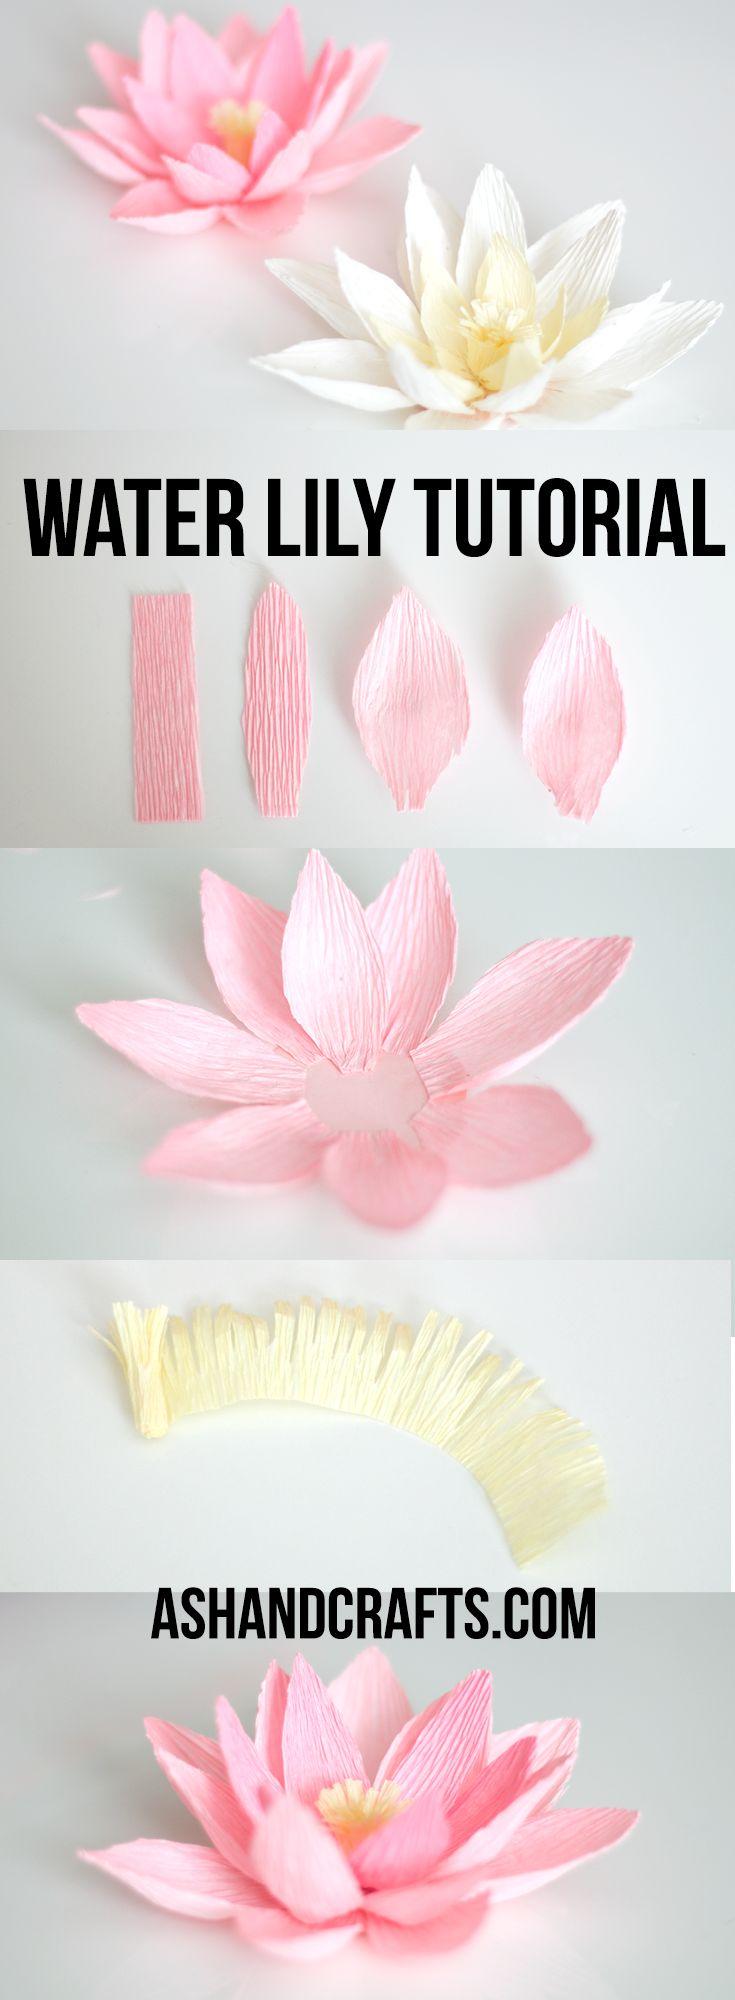 Wedding - Crepe Paper Water Lily